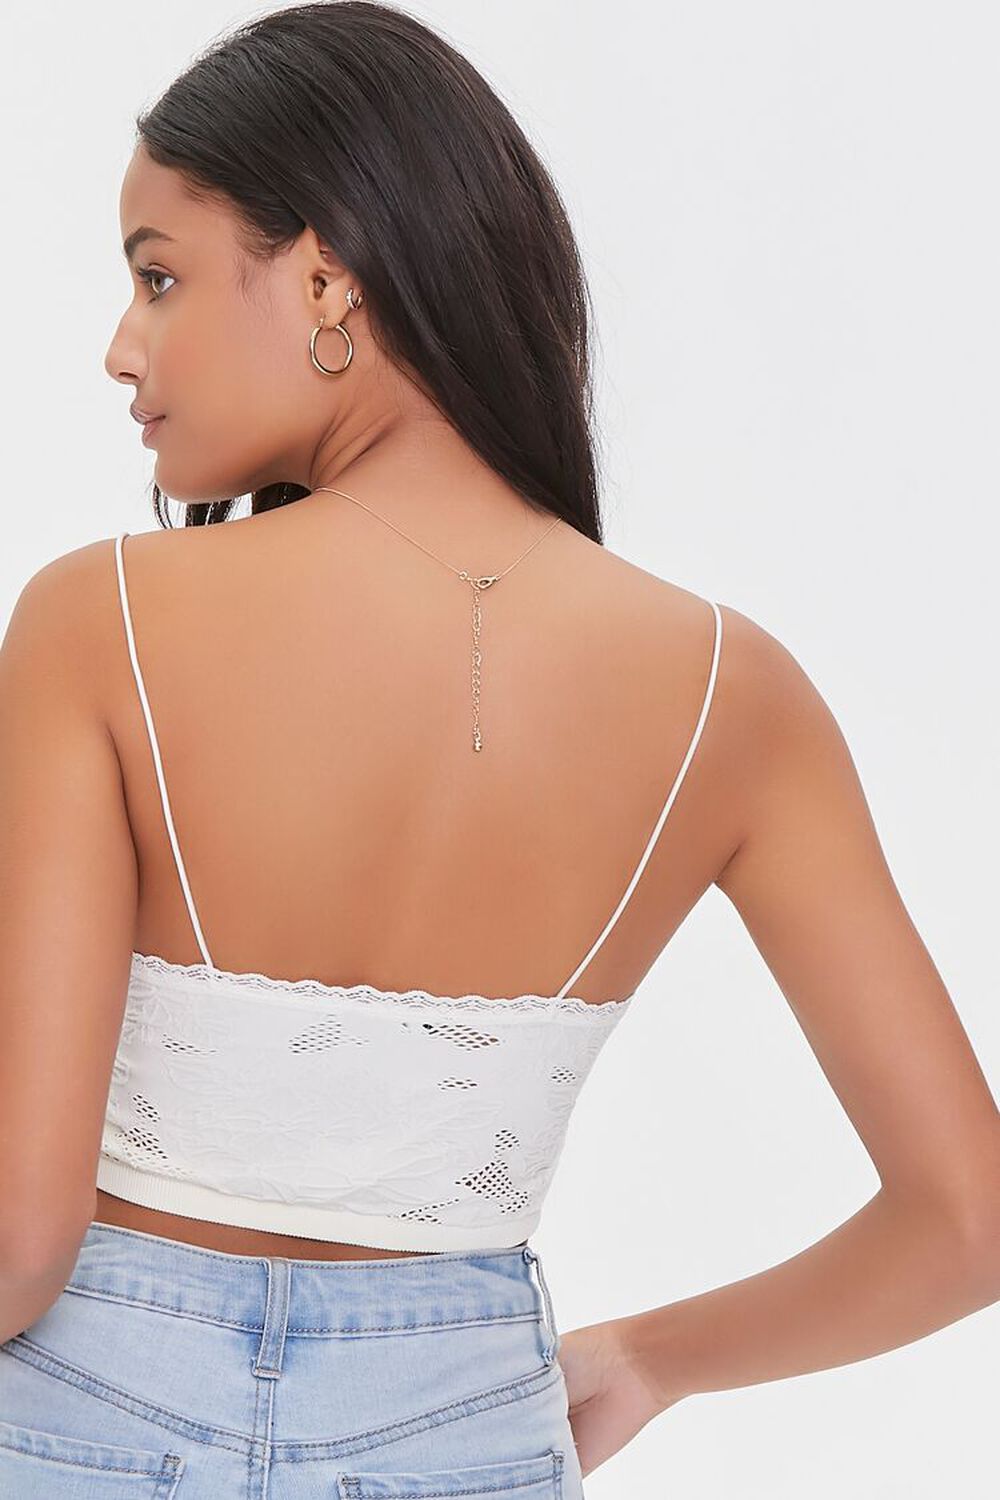 CREAM Embroidered Floral Lace Cami, image 3